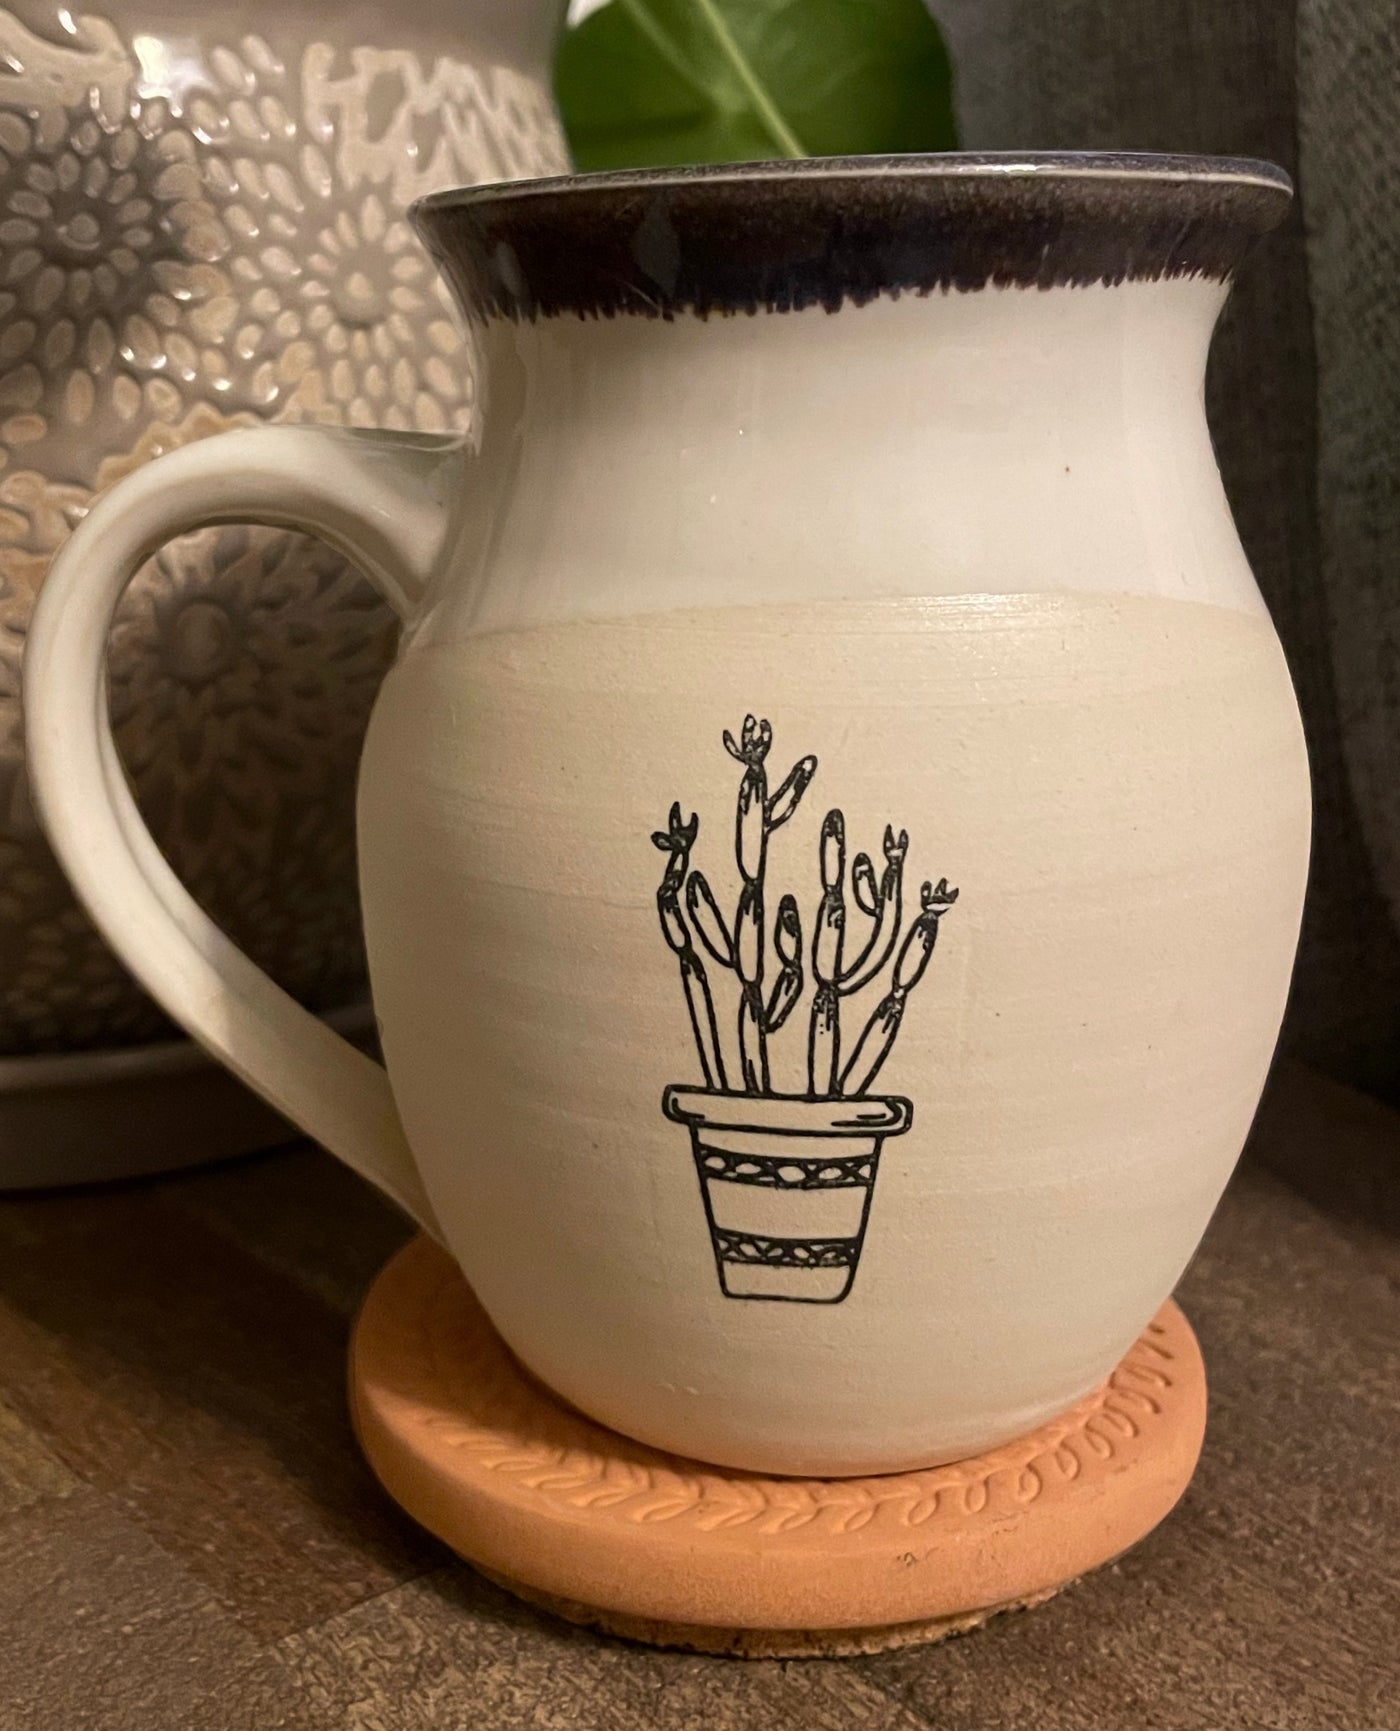 B3 These small batch, handmade mugs are available in blue or green. Each mug is stamped with a unique plant design. Explore the best and coolest gift ideas for plant enthusiasts!